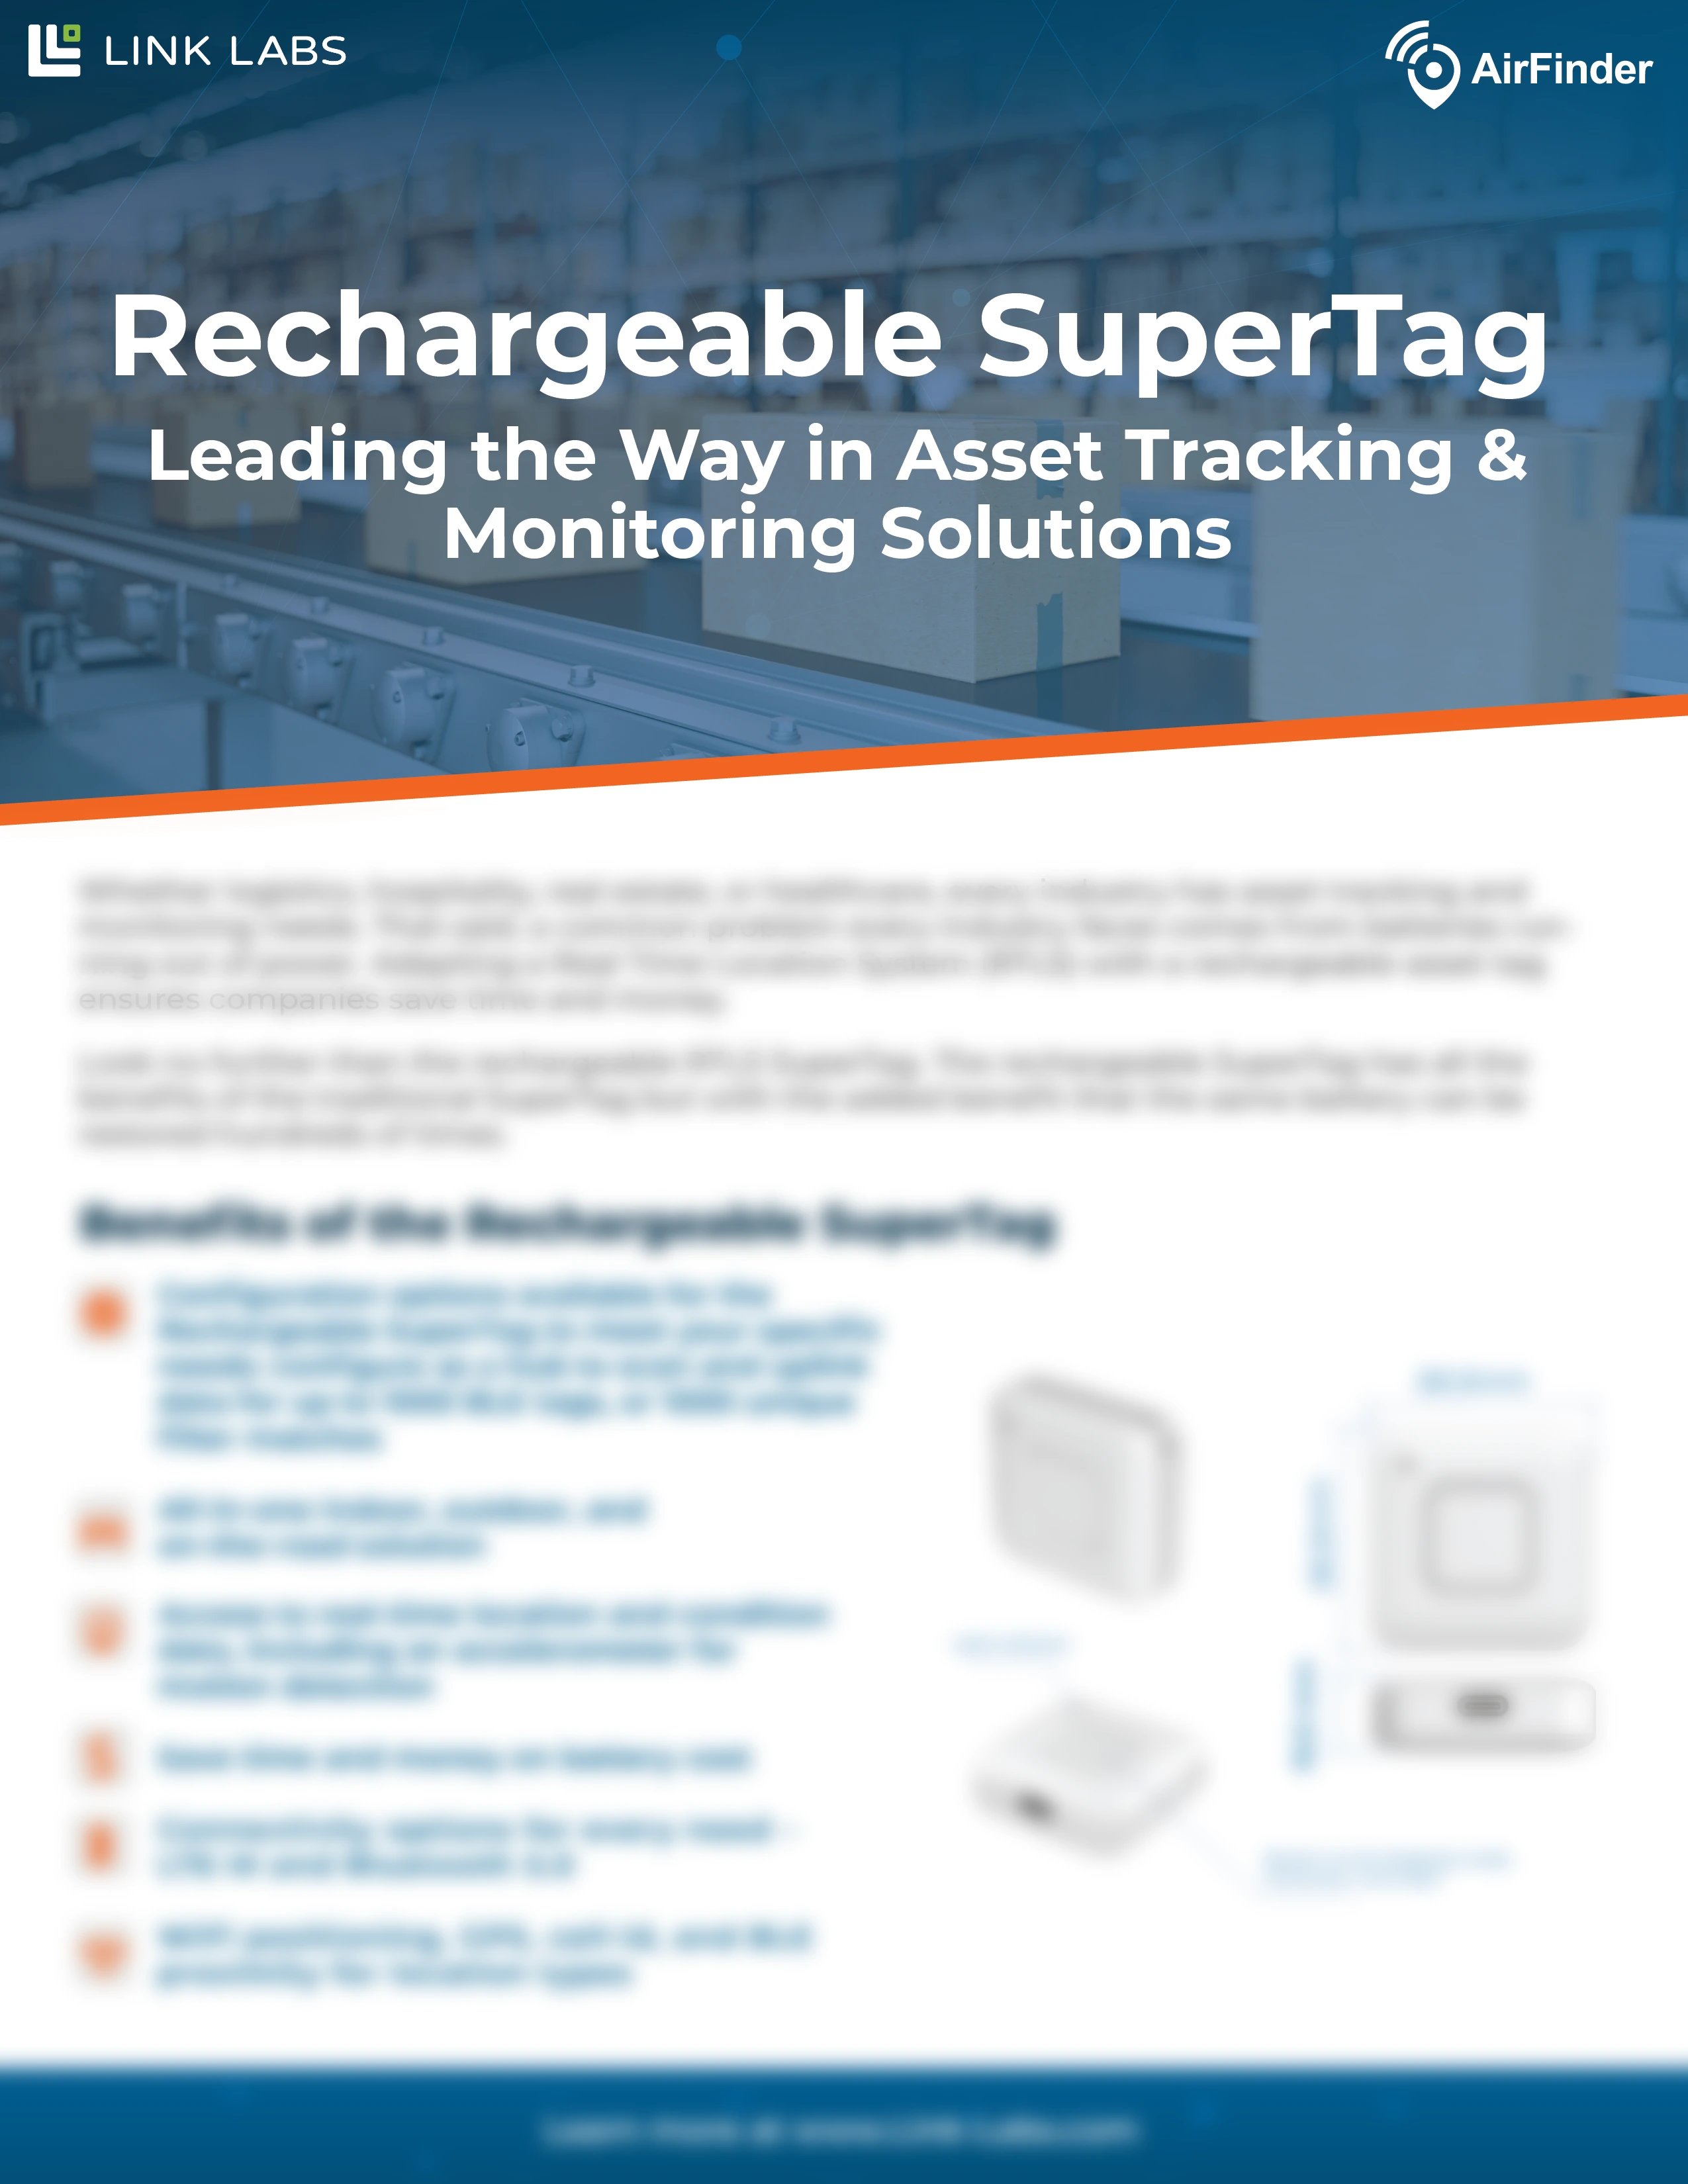 Rechargeable SuperTag Blurred